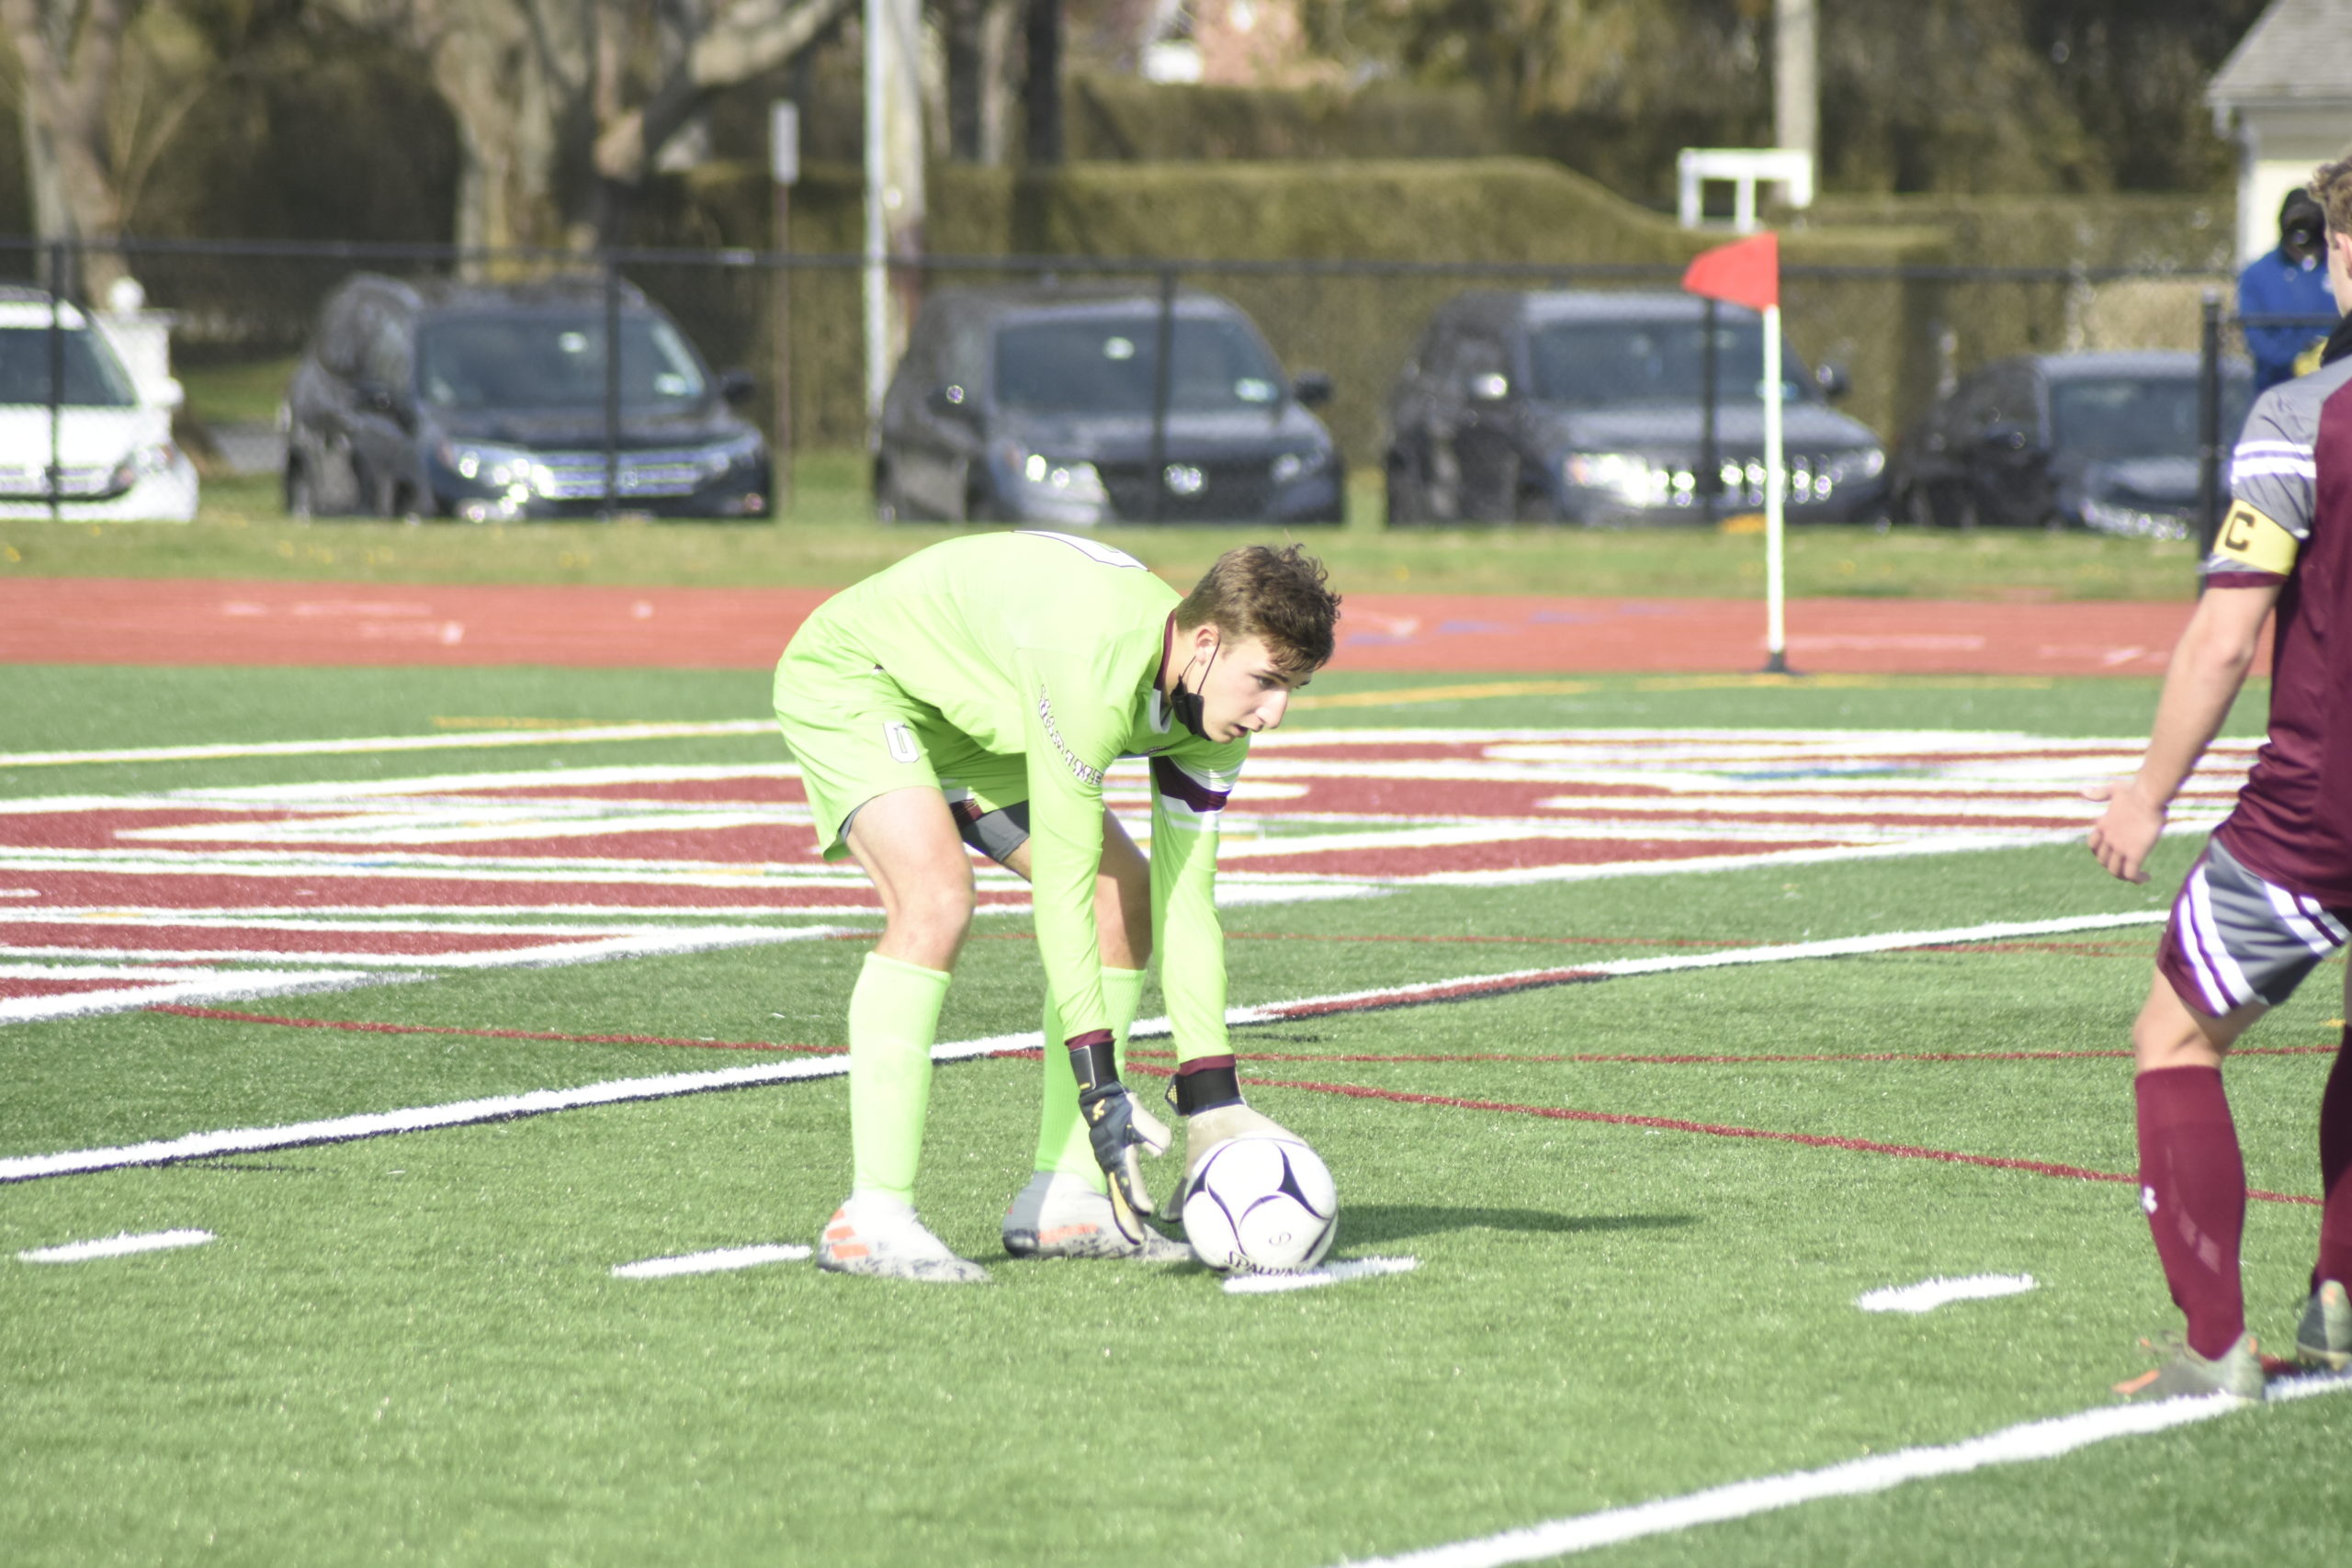 Southampton sophomore goalie Andrew Panza plays a ball that comes into the box.